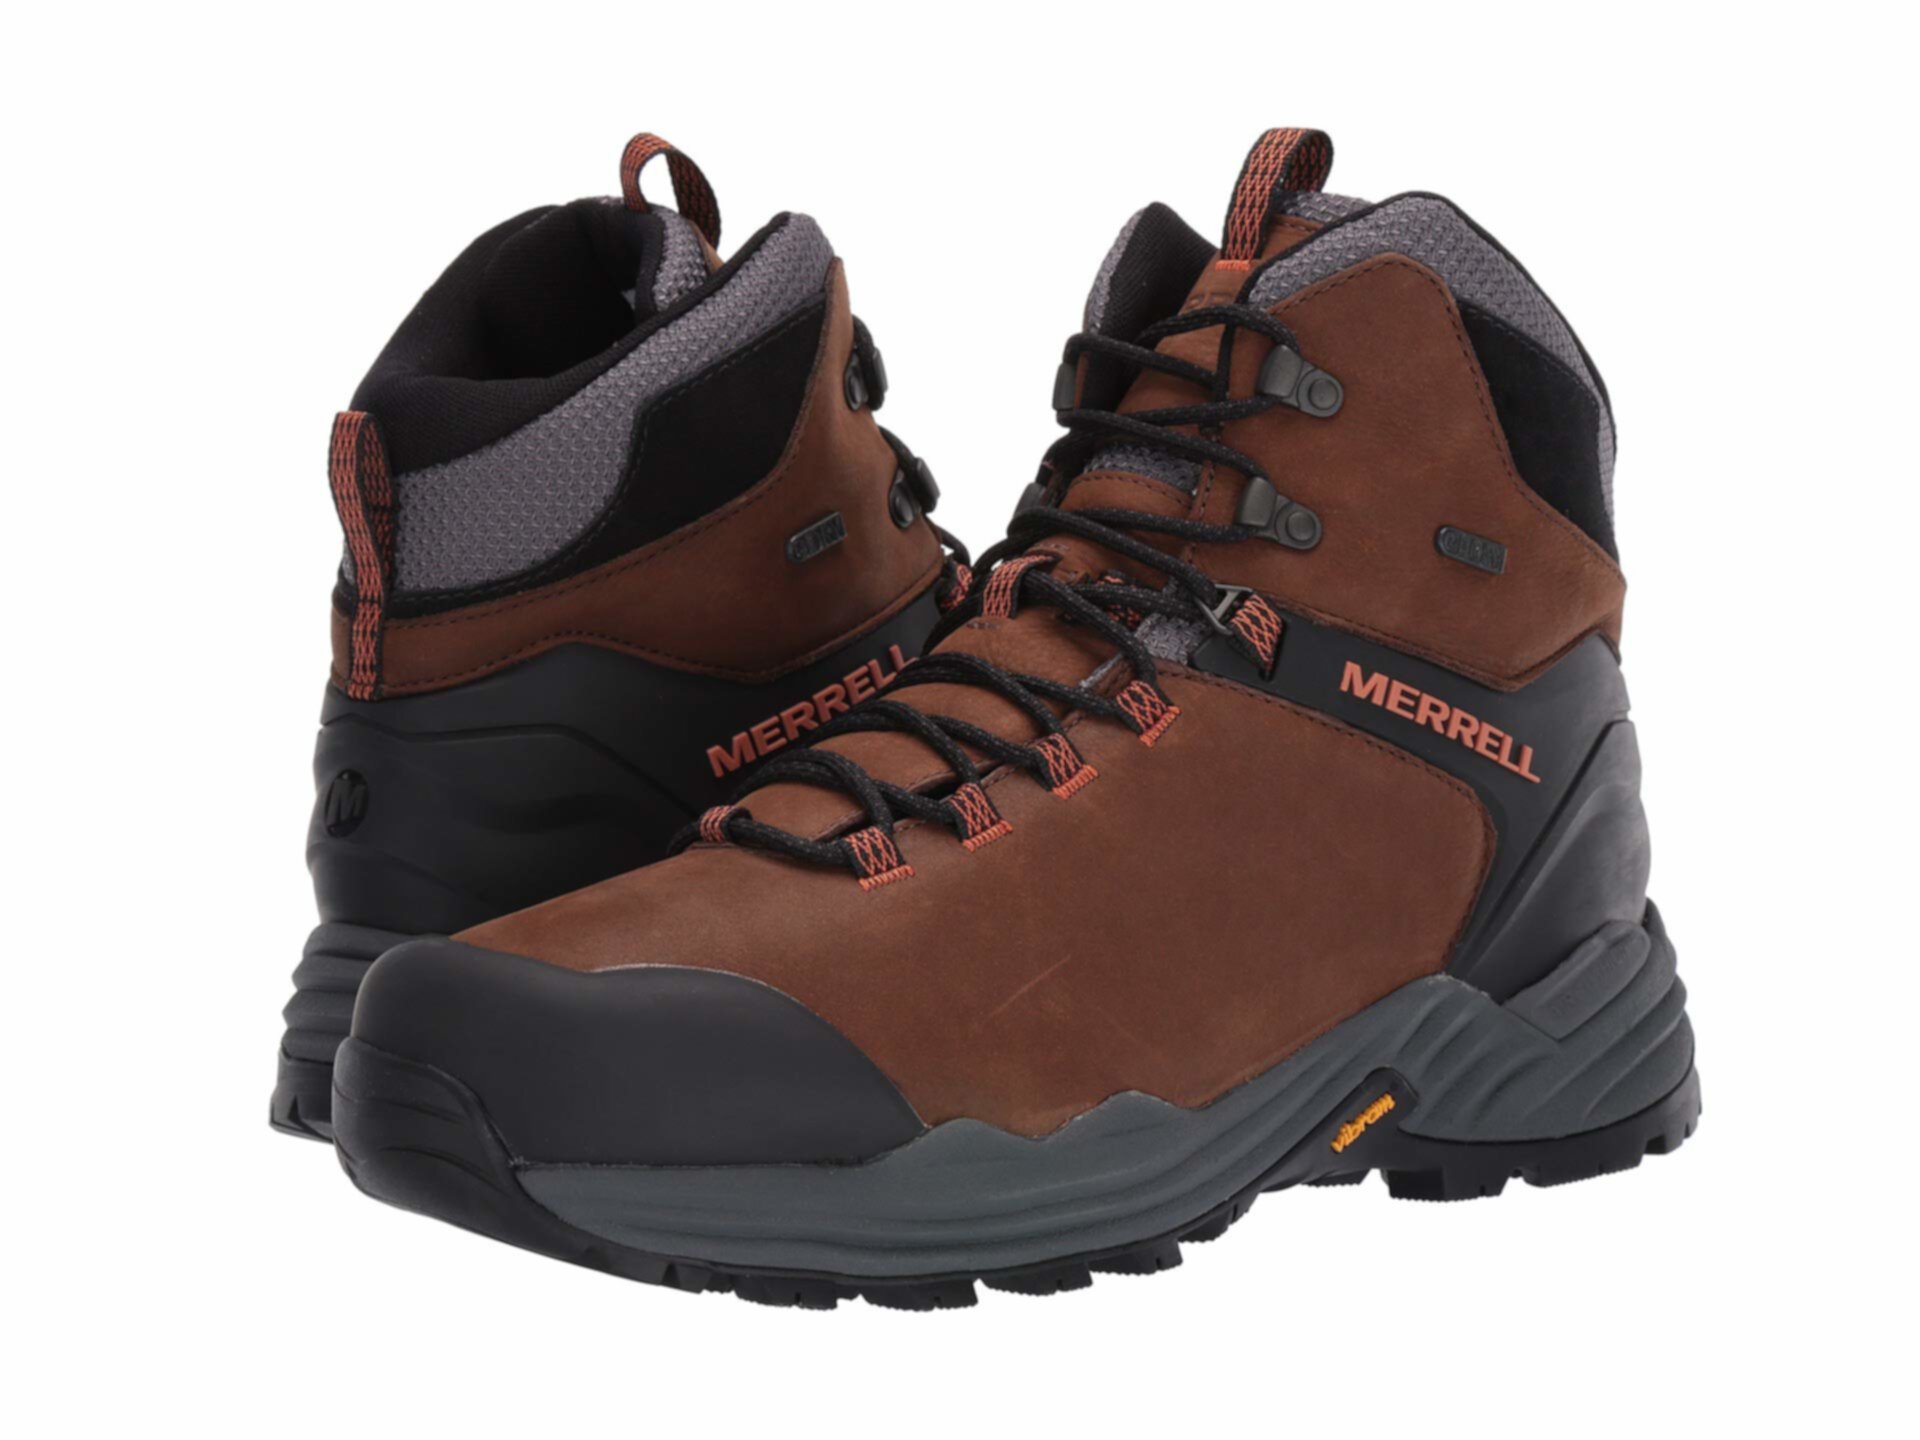 Phaserbound 2 Tall Водонепроницаемый Merrell